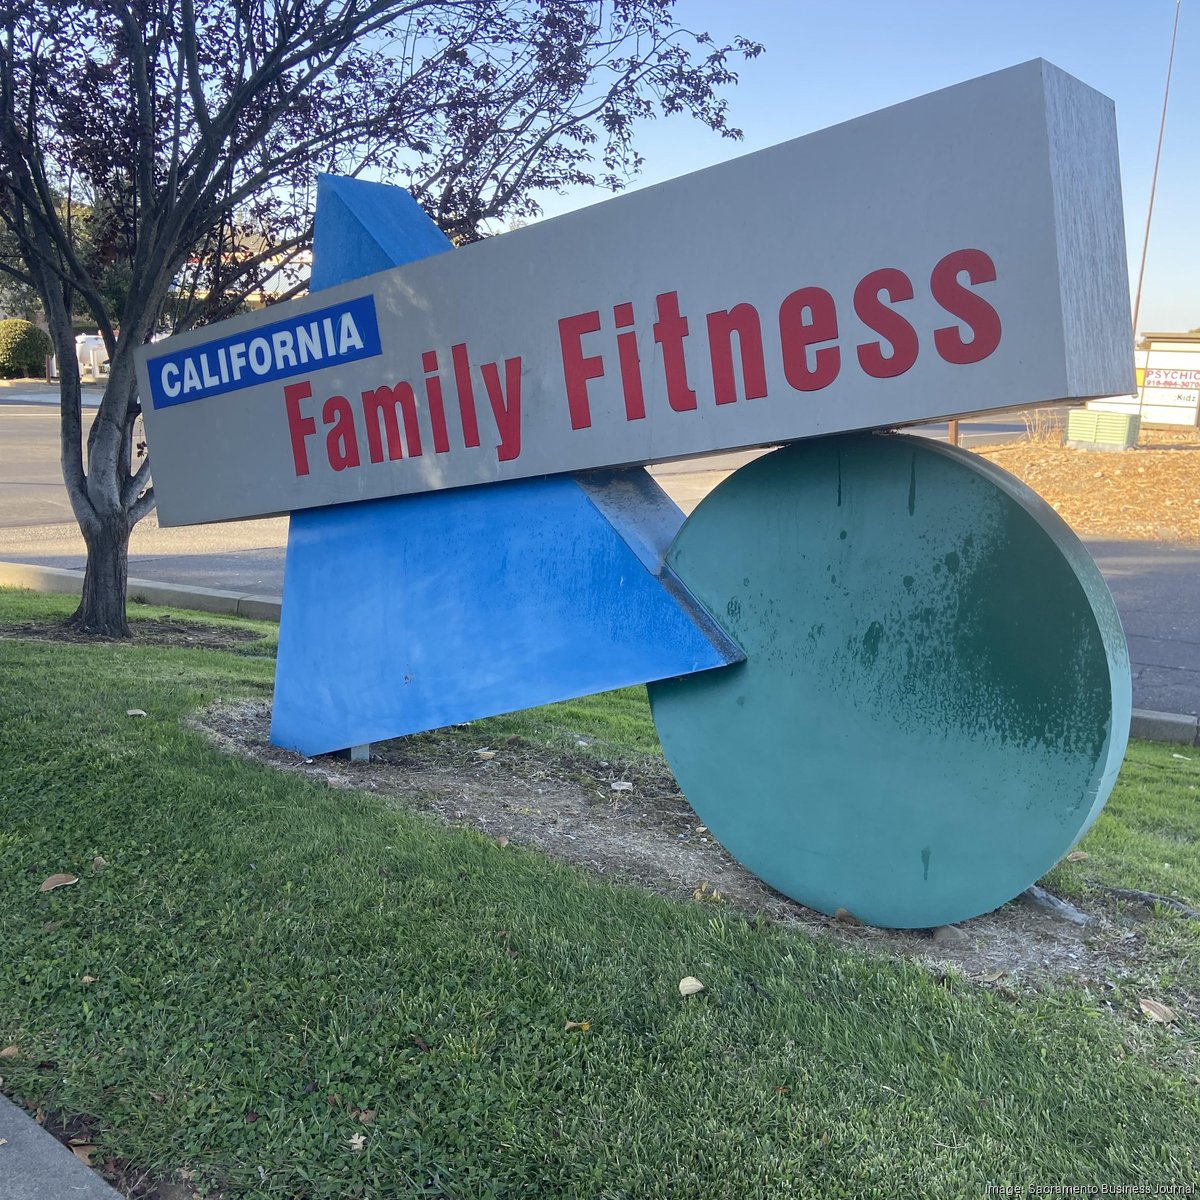 California Family Fitness sued for $3.8 million in unpaid rent